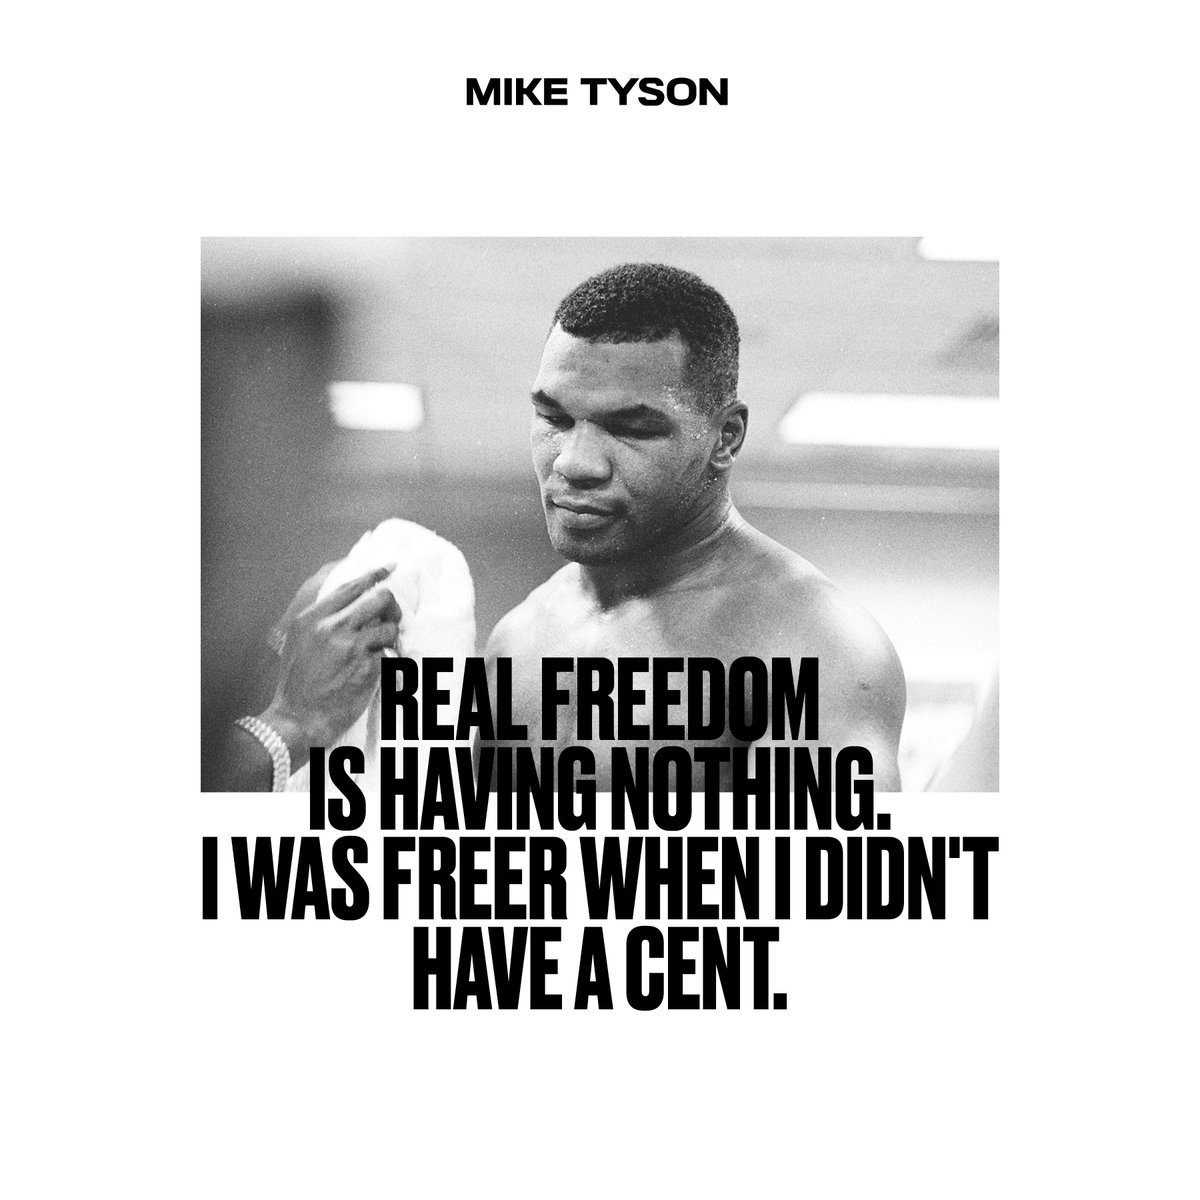 Real freedom is having nothing. I was freer when I didn’t have a cent. #miketyson #vintagetyson https://t.co/BxbuCfEF2D